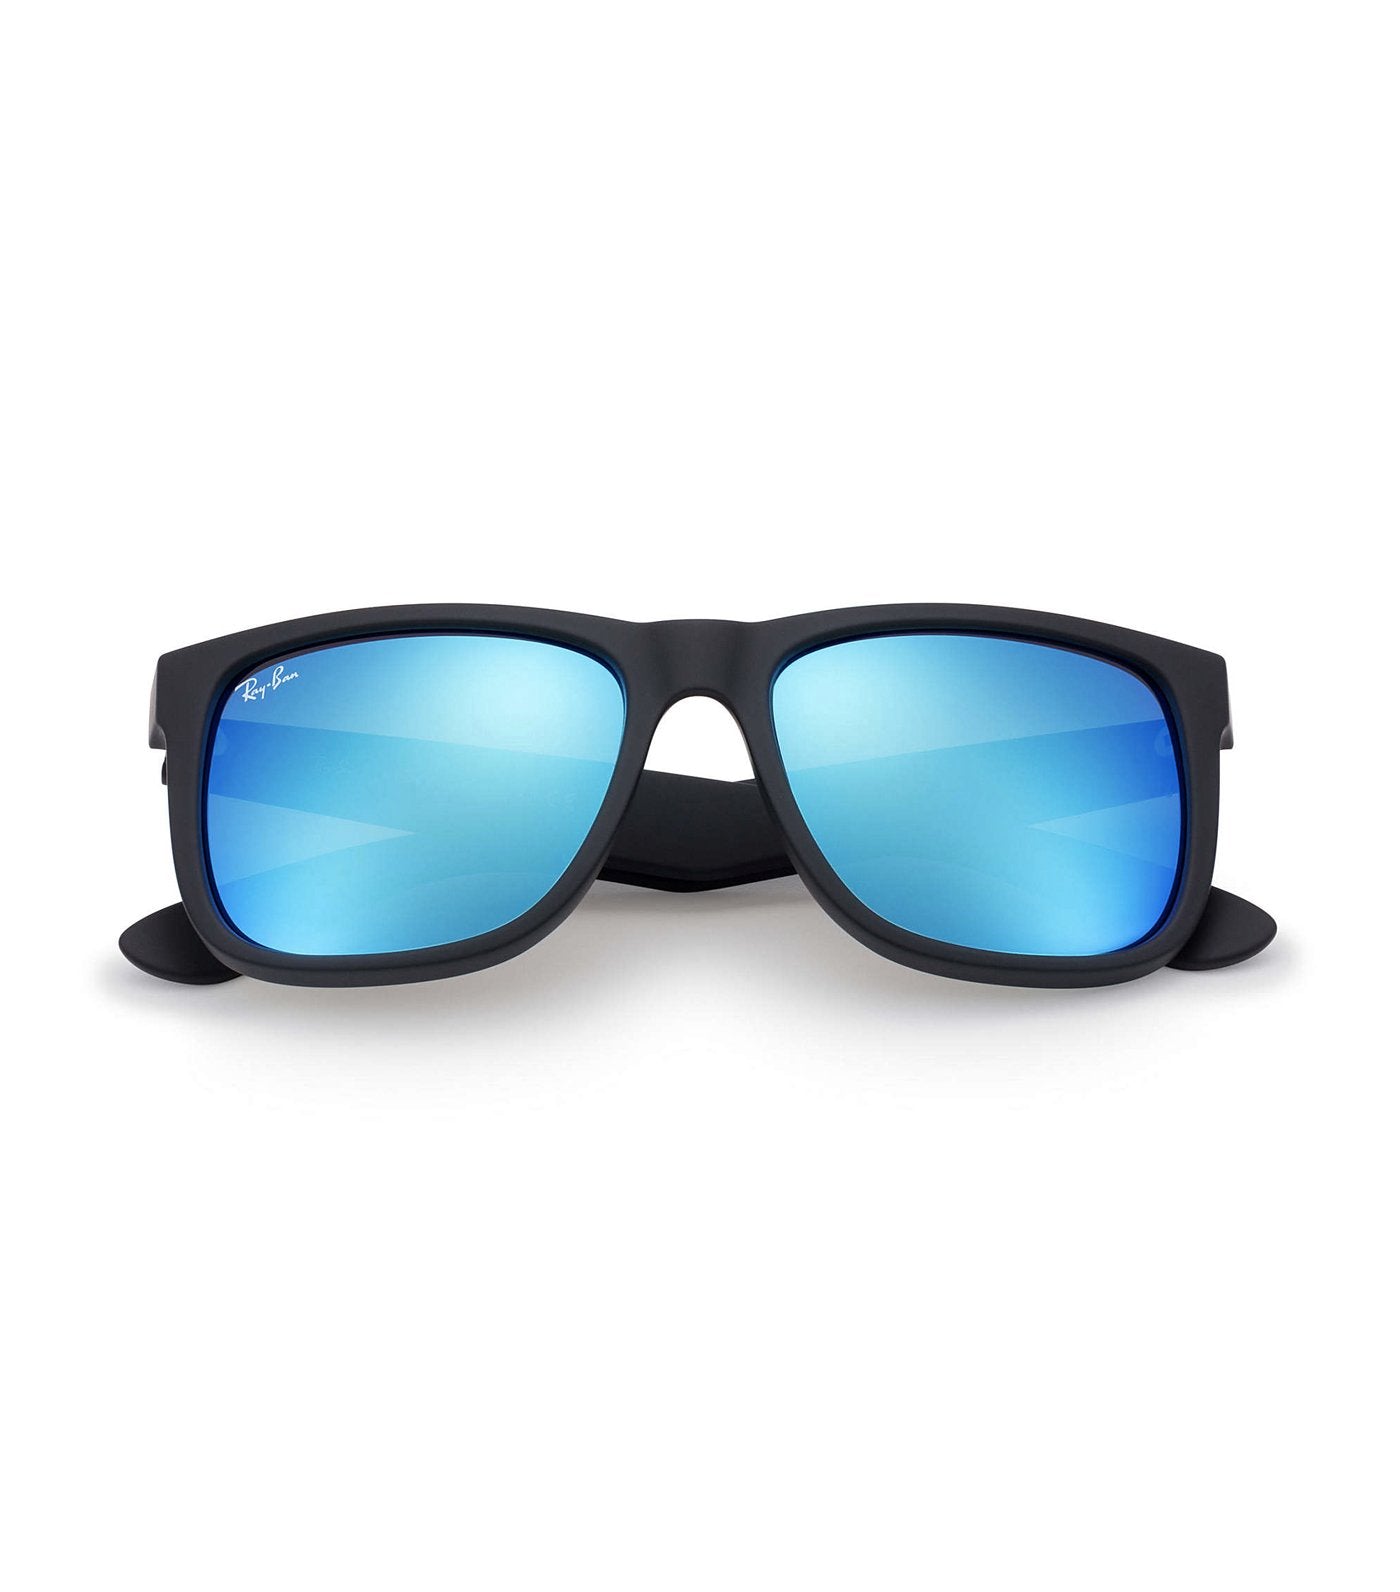 Youngster Rubber Flash Sunglasses Lens Blue Ray-Ban Mirror 55